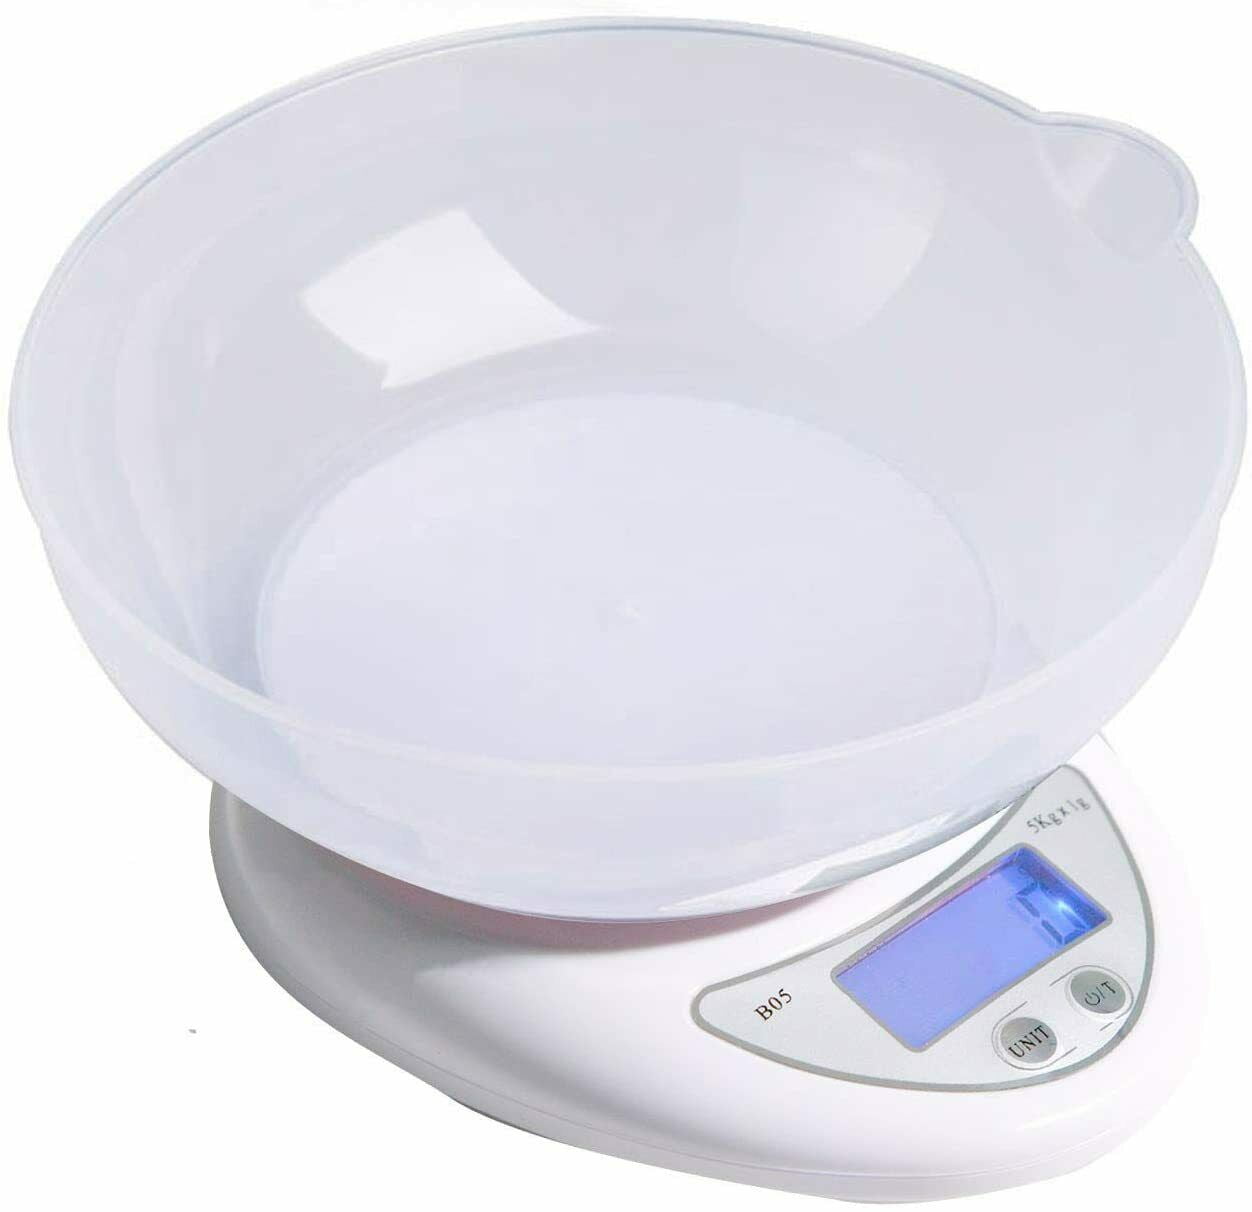 DMI Digital Food Scale and Kitchen Scale for Cooking, Baking and Meal Prep,  Withstands up to 11 Pounds of Weight, Measures units between oz, g, mL